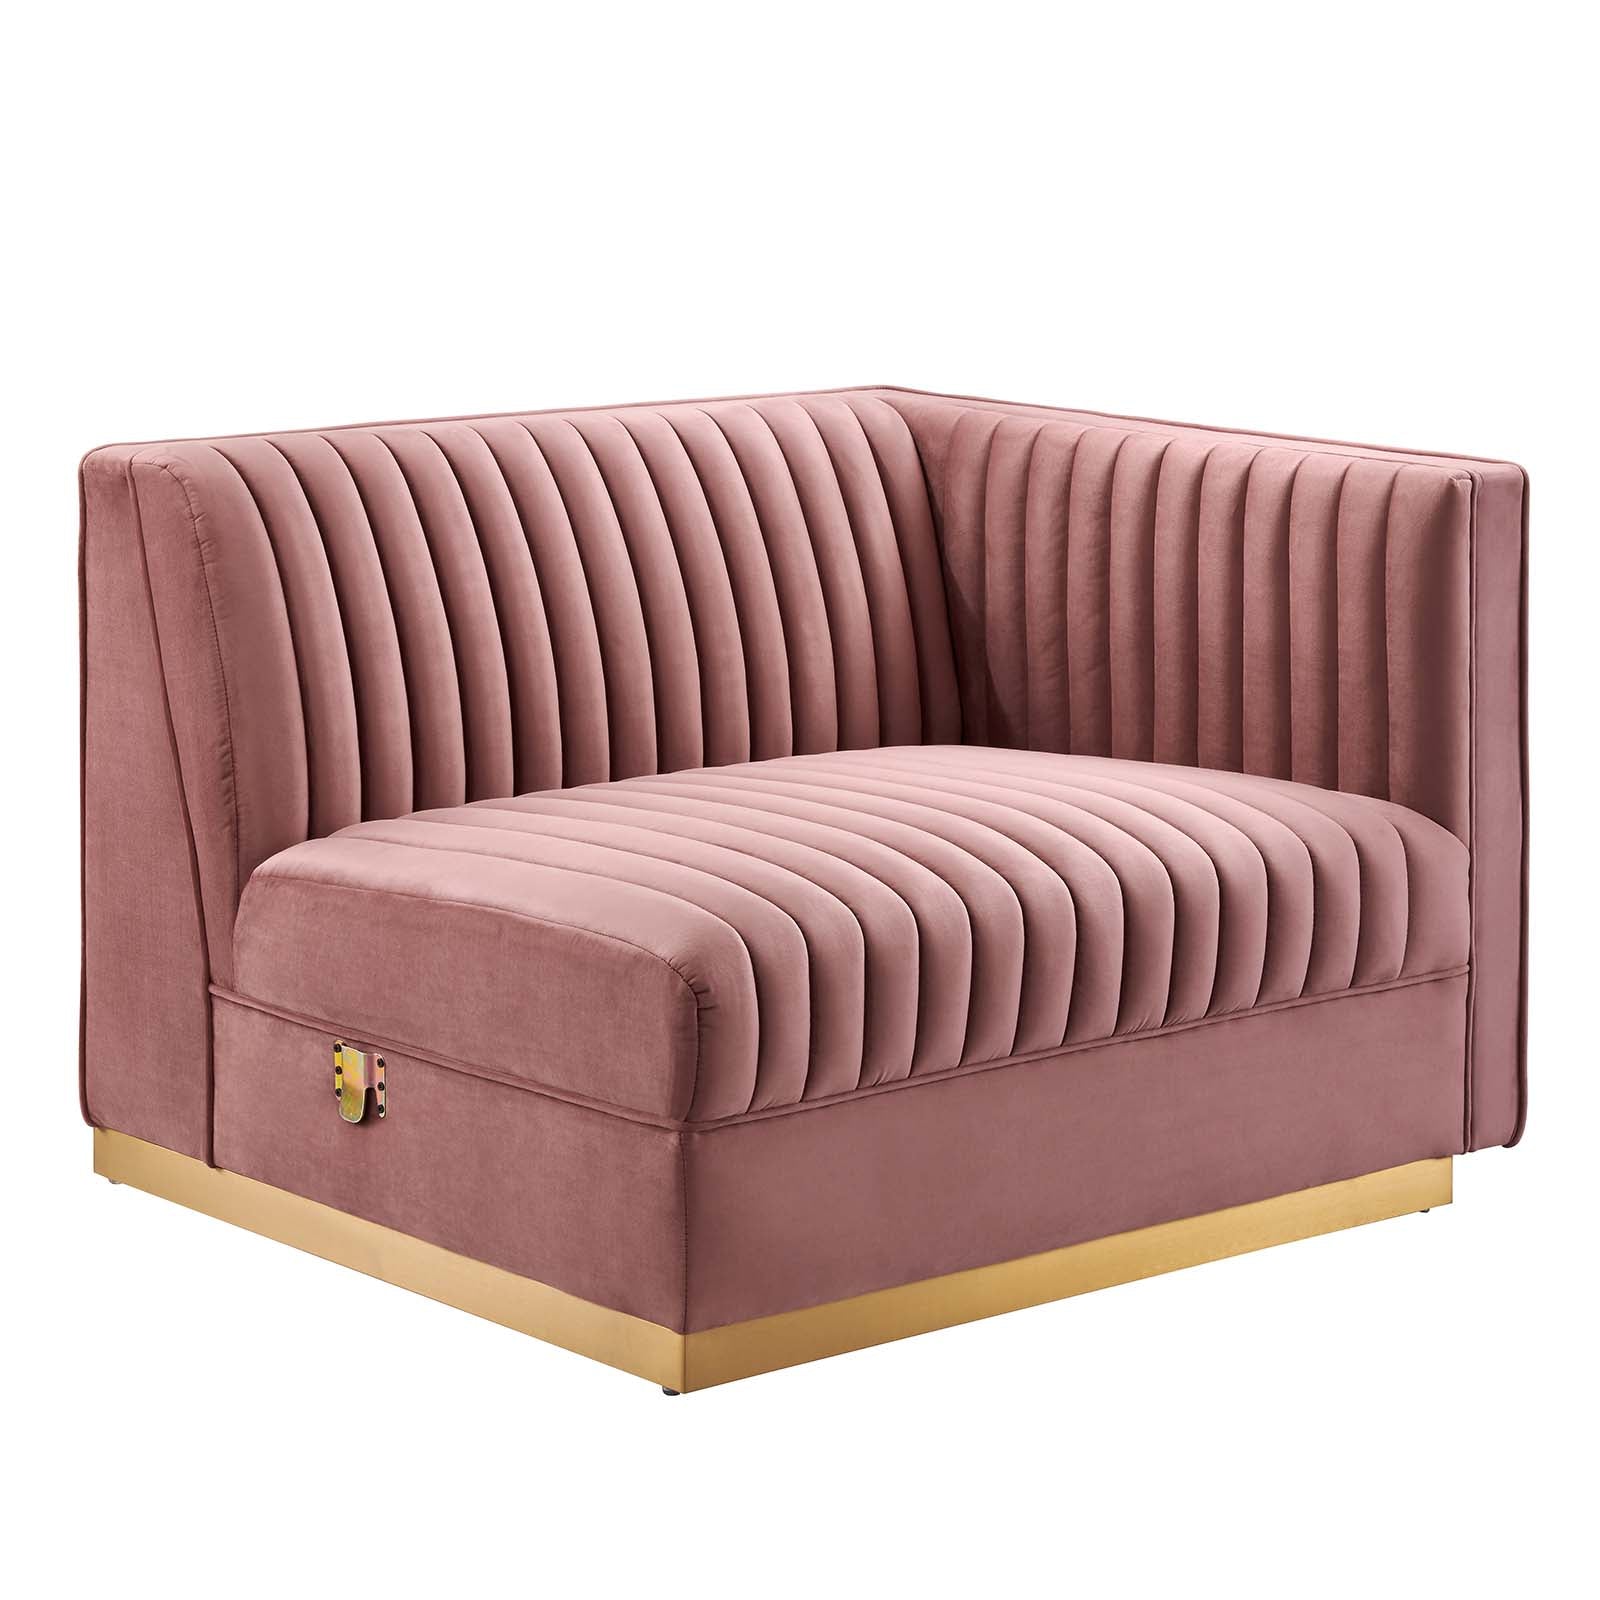 Modway Sectional Sofas - Sanguine Channel Tufted Performance Velvet 3-Seat Modular Sectional Sofa Dusty Rose